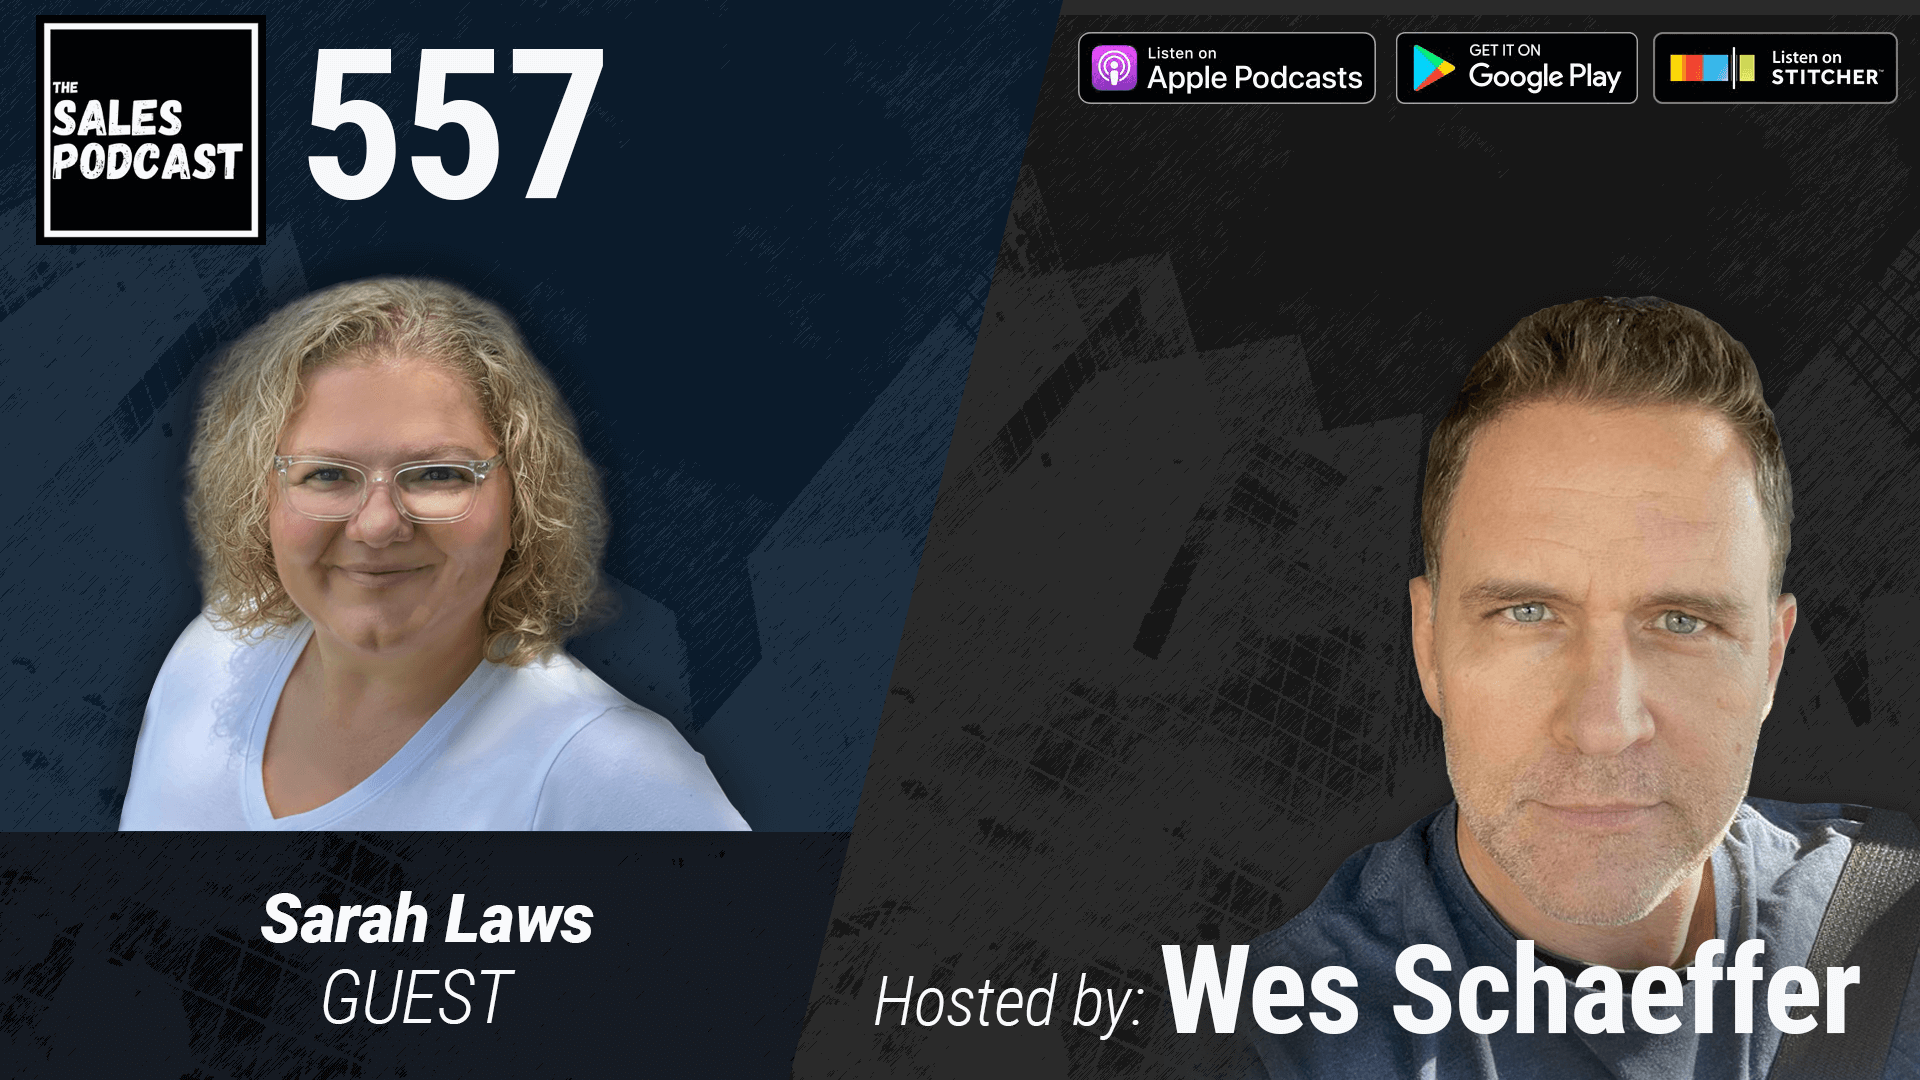 Make More Money With Masterminds, Says Sarah Laws  on The Sales Podcast with Wes Schaeffer, The Sales Whisperer® 